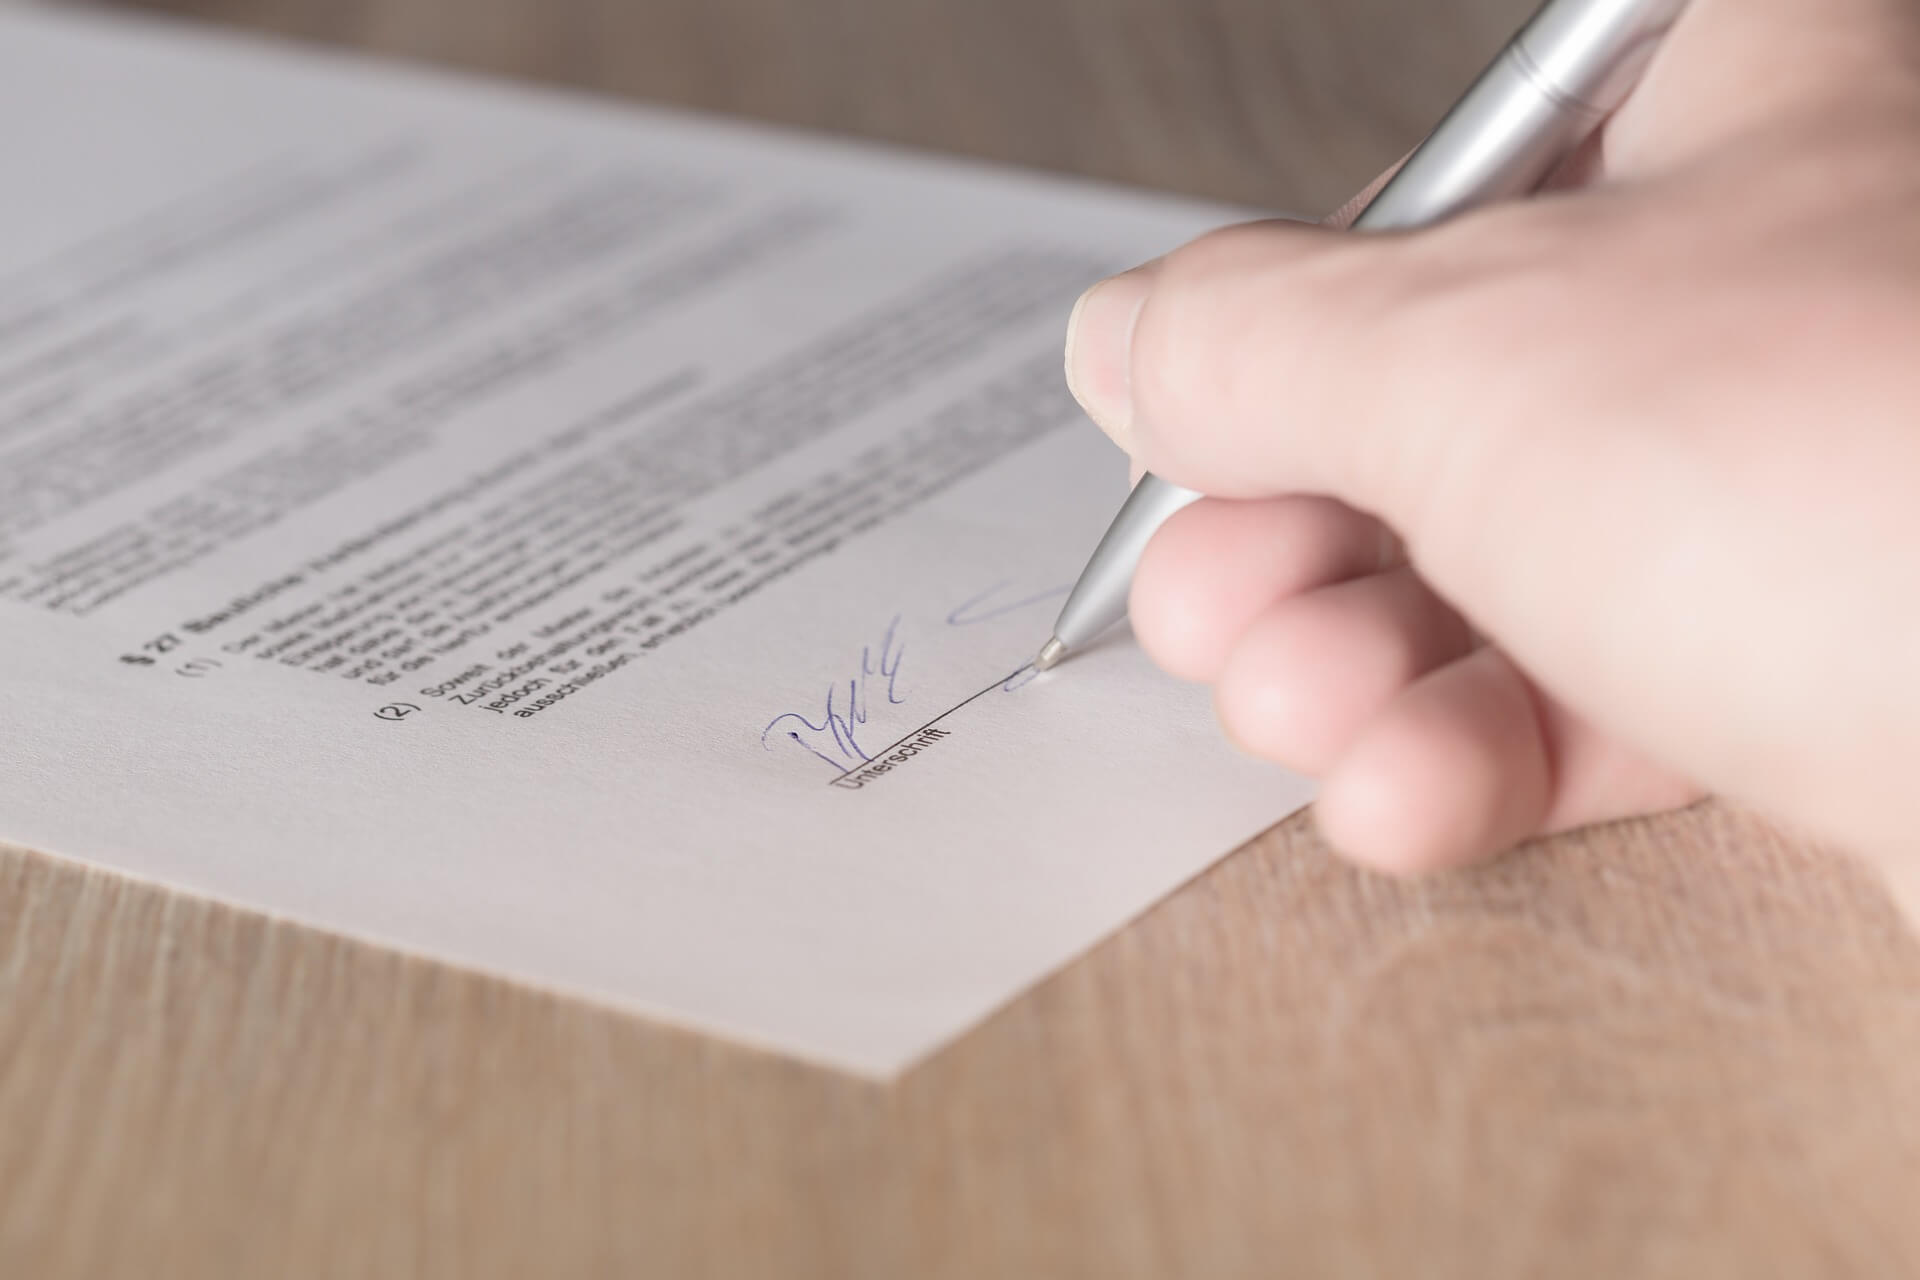 Three Contract Provisions a Small Business Cannot Live Without – From a Litigator’s Perspective, Part 4: Contractual Provisions (Prejudgment and Postjudgment Interest)